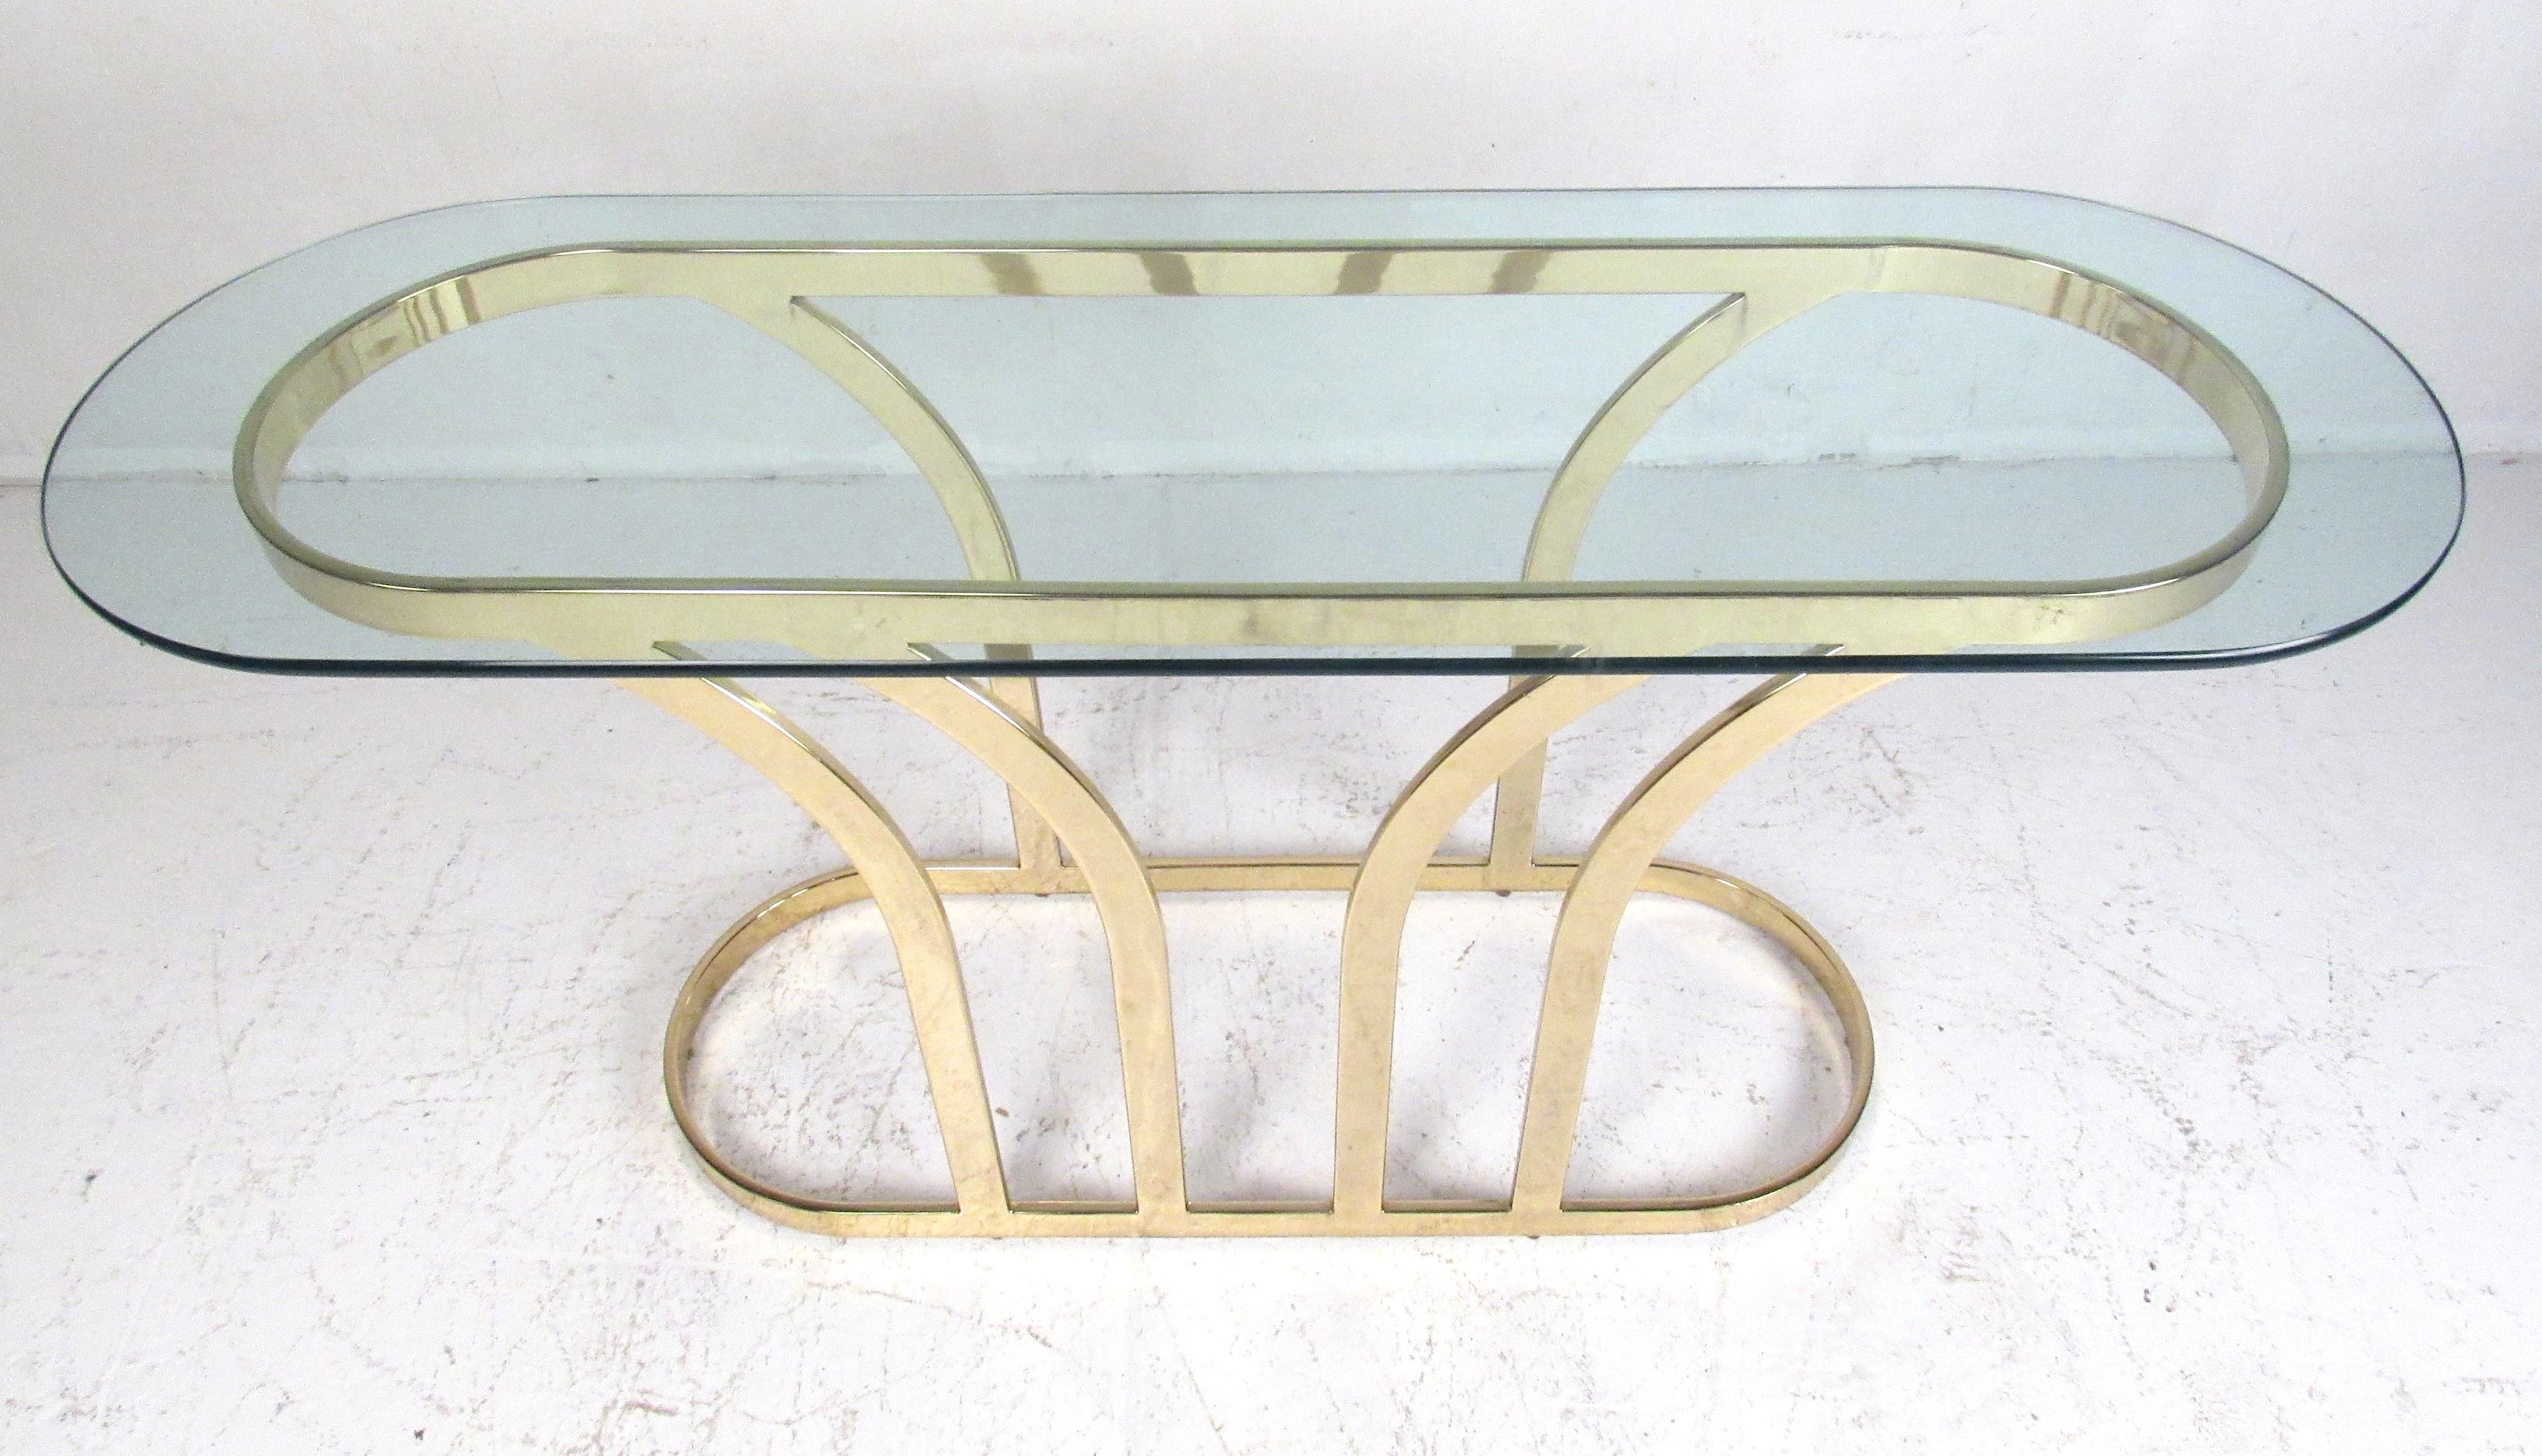 Stylish console table features a racetrack-shaped thick glass top and a brass colored base. Will make a beautiful addition to any Mid-Century Modern or Hollywood Regency setting. Please confirm item location (NY or NJ) with dealer.